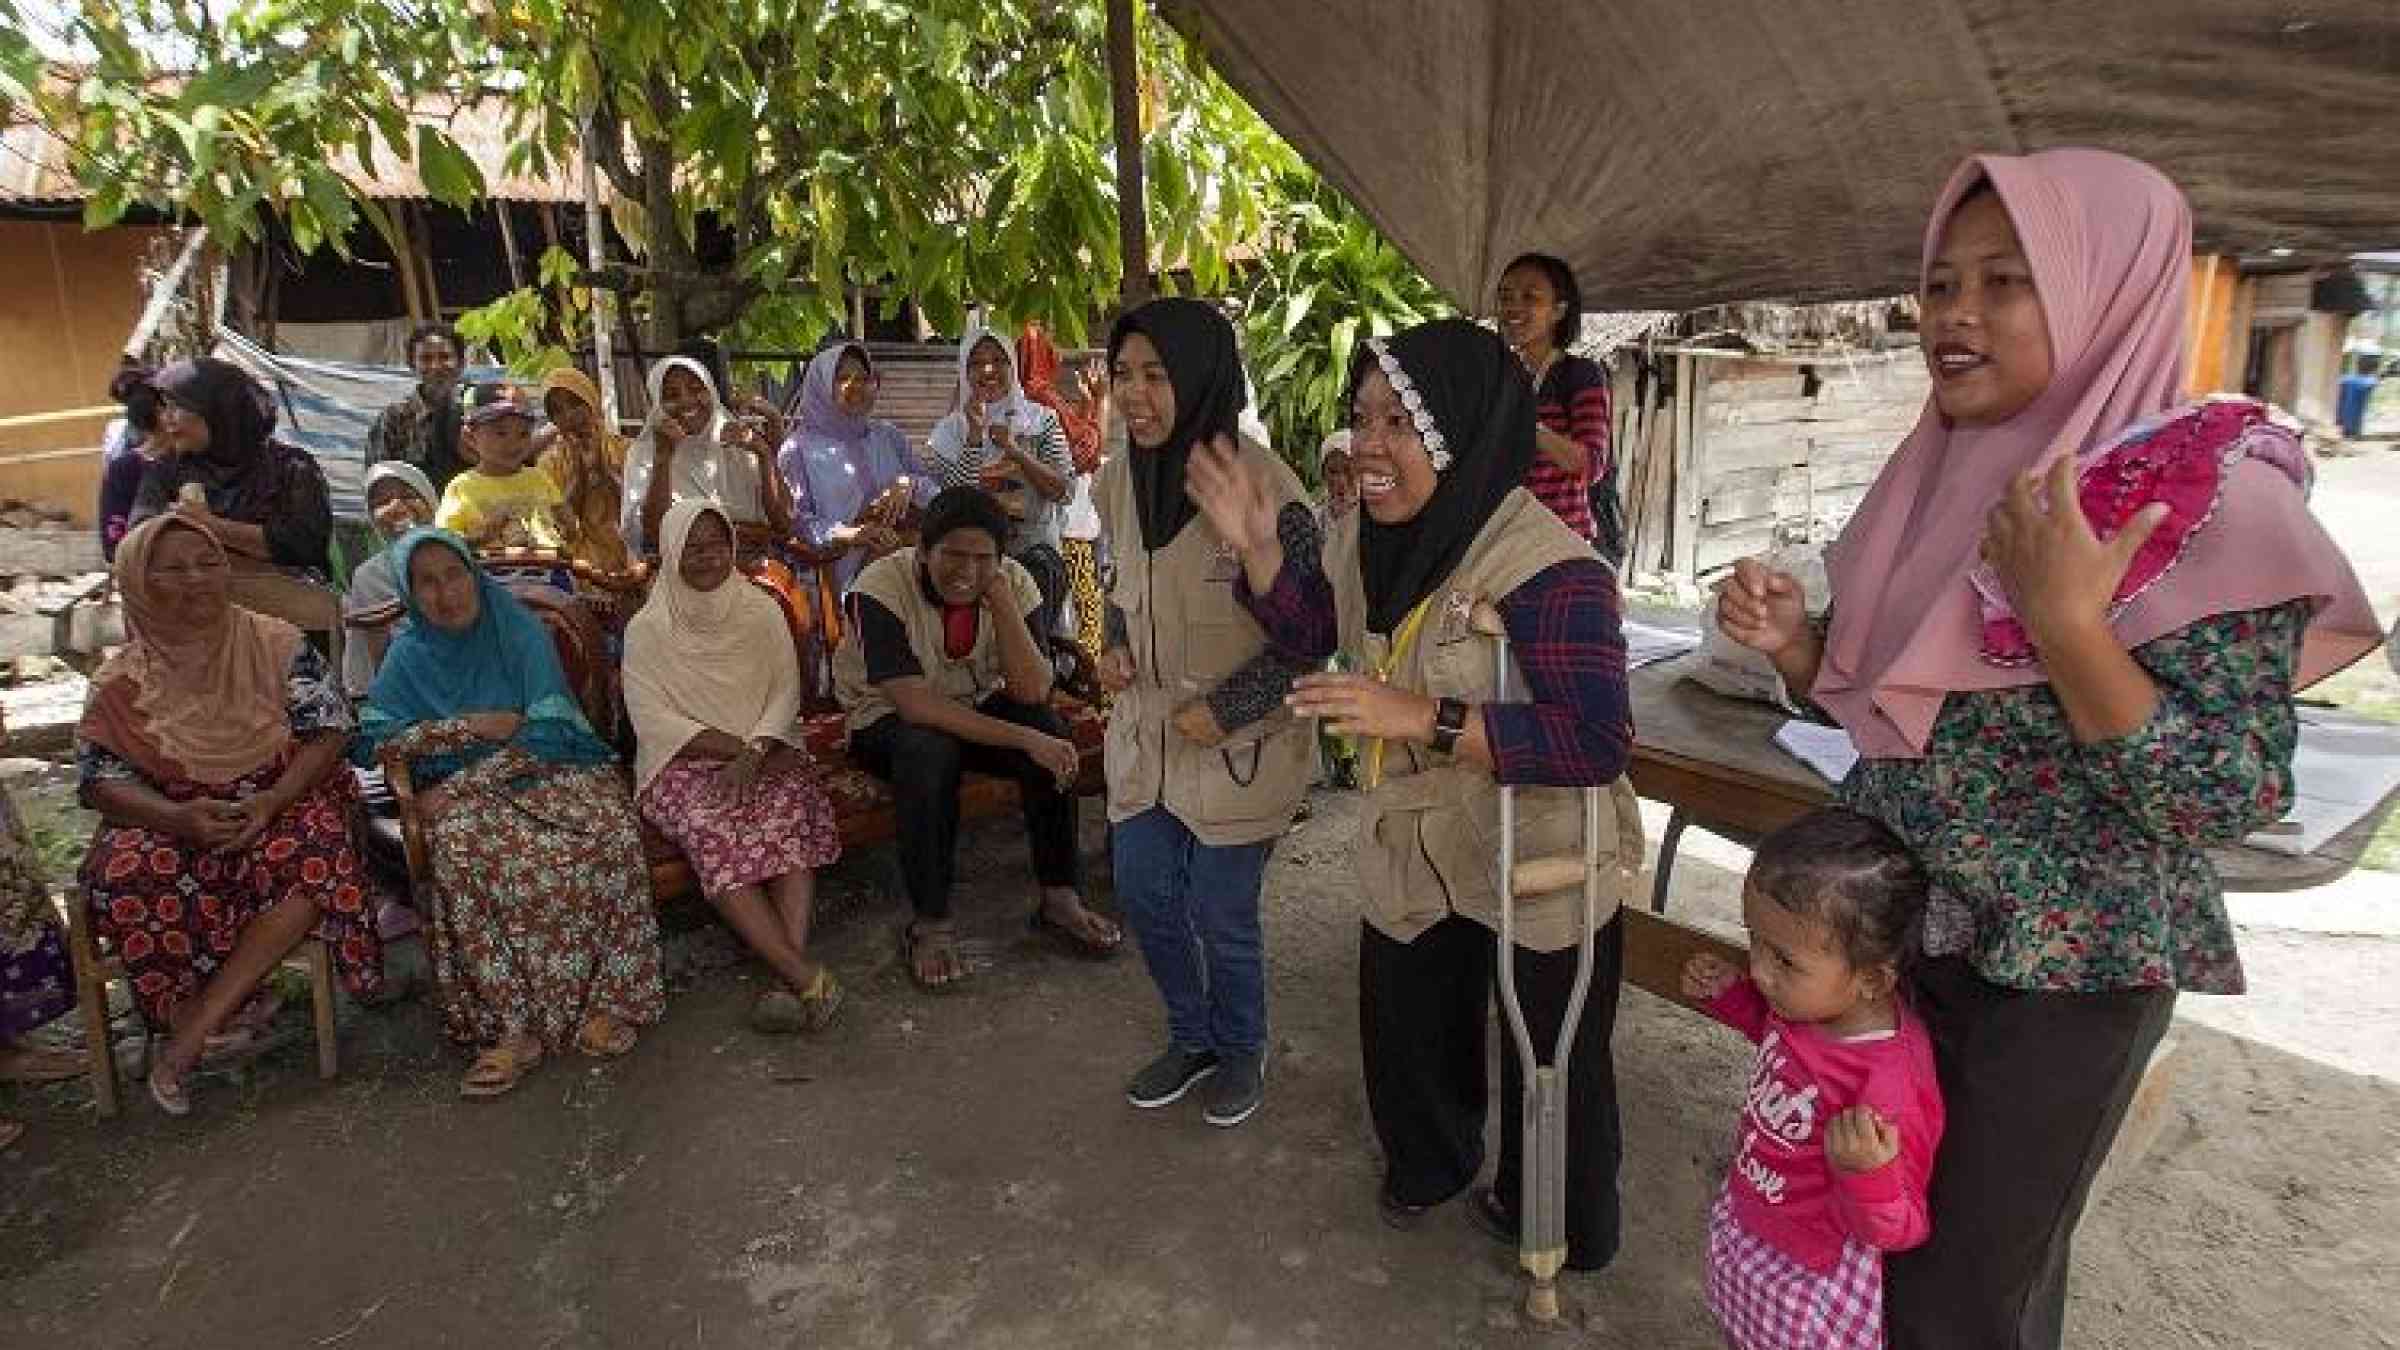 (c)Dwi Oblo/ASB Indonesia and the Philippines. Two members of a Disabled People's Organisation (DPO), wearing khaki vests, are delivering a hygiene promotion session for community members of Mantikole Village, Sigi, Central Sulawesi, Indonesia